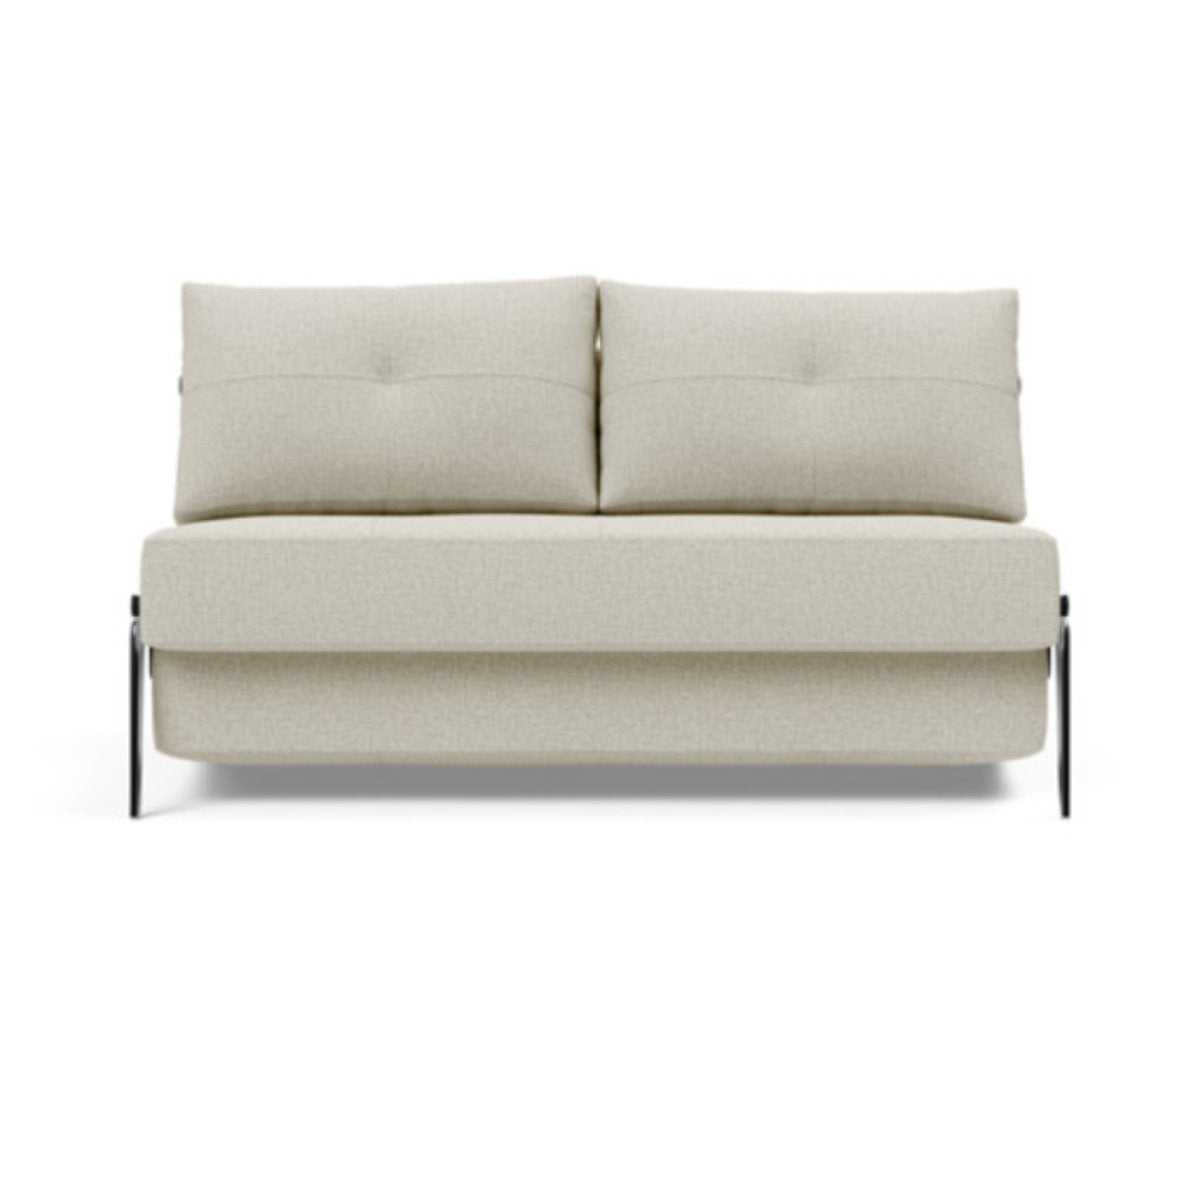 Load image into Gallery viewer, Cubed Full Size Sofa Bed With Alu Legs 527 Mixed Dance NaturalSofa Beds INNOVATION  527 Mixed Dance Natural   Four Hands, Burke Decor, Mid Century Modern Furniture, Old Bones Furniture Company, Old Bones Co, Modern Mid Century, Designer Furniture, https://www.oldbonesco.com/
